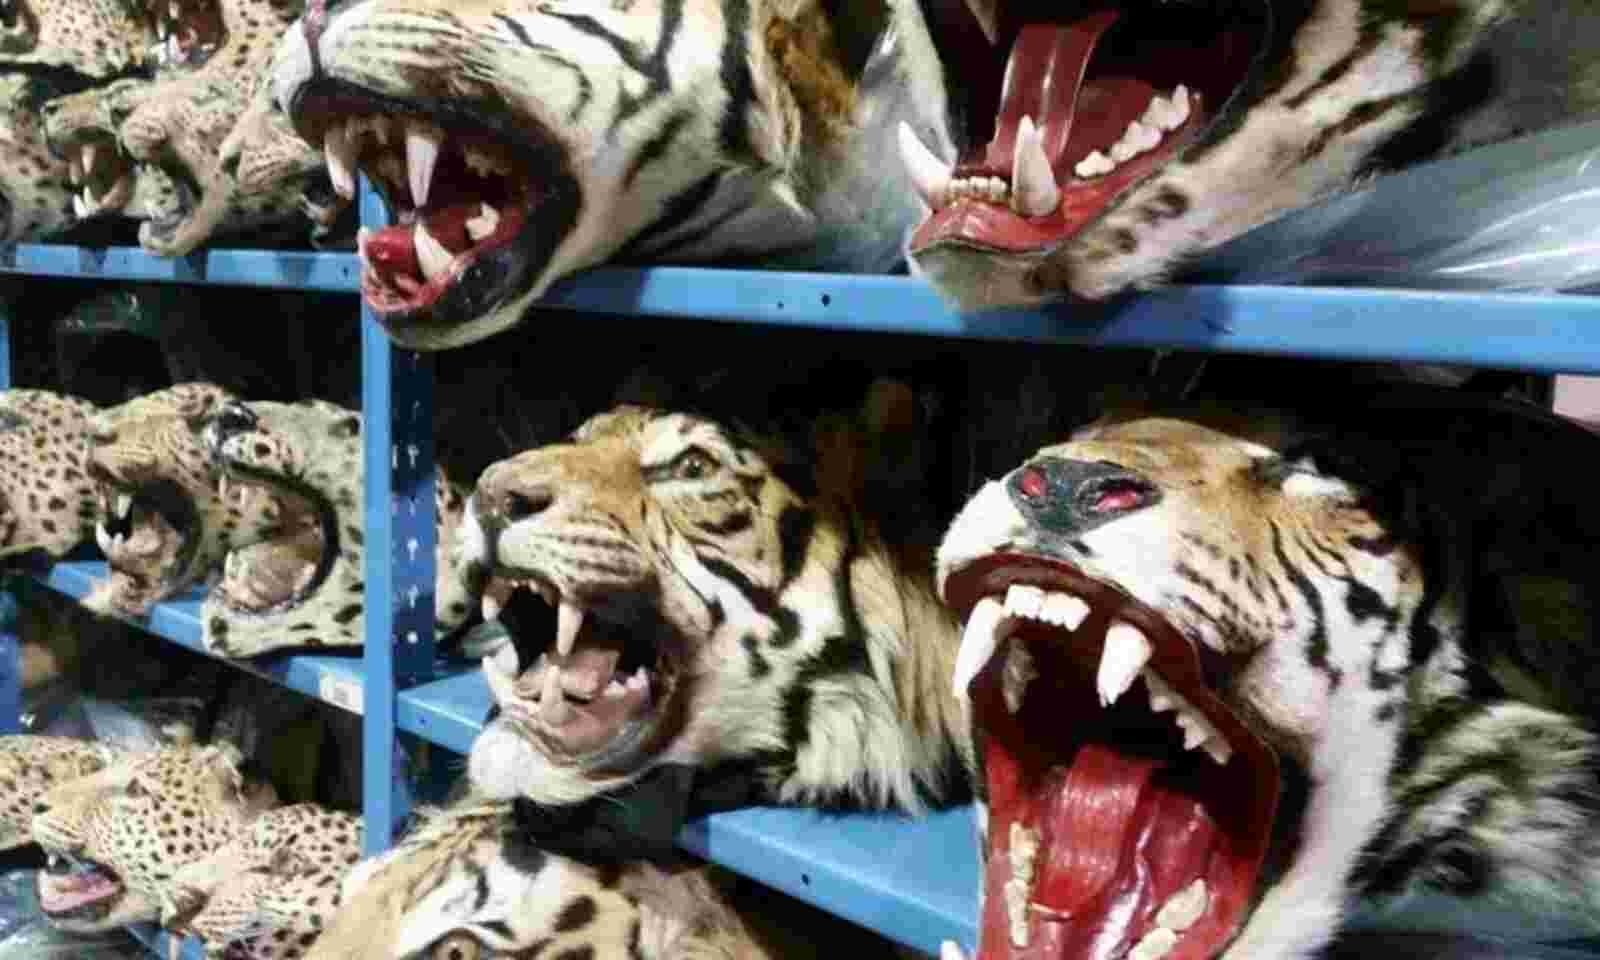 Illegal wildlife trade through Indian airports threatens conservation